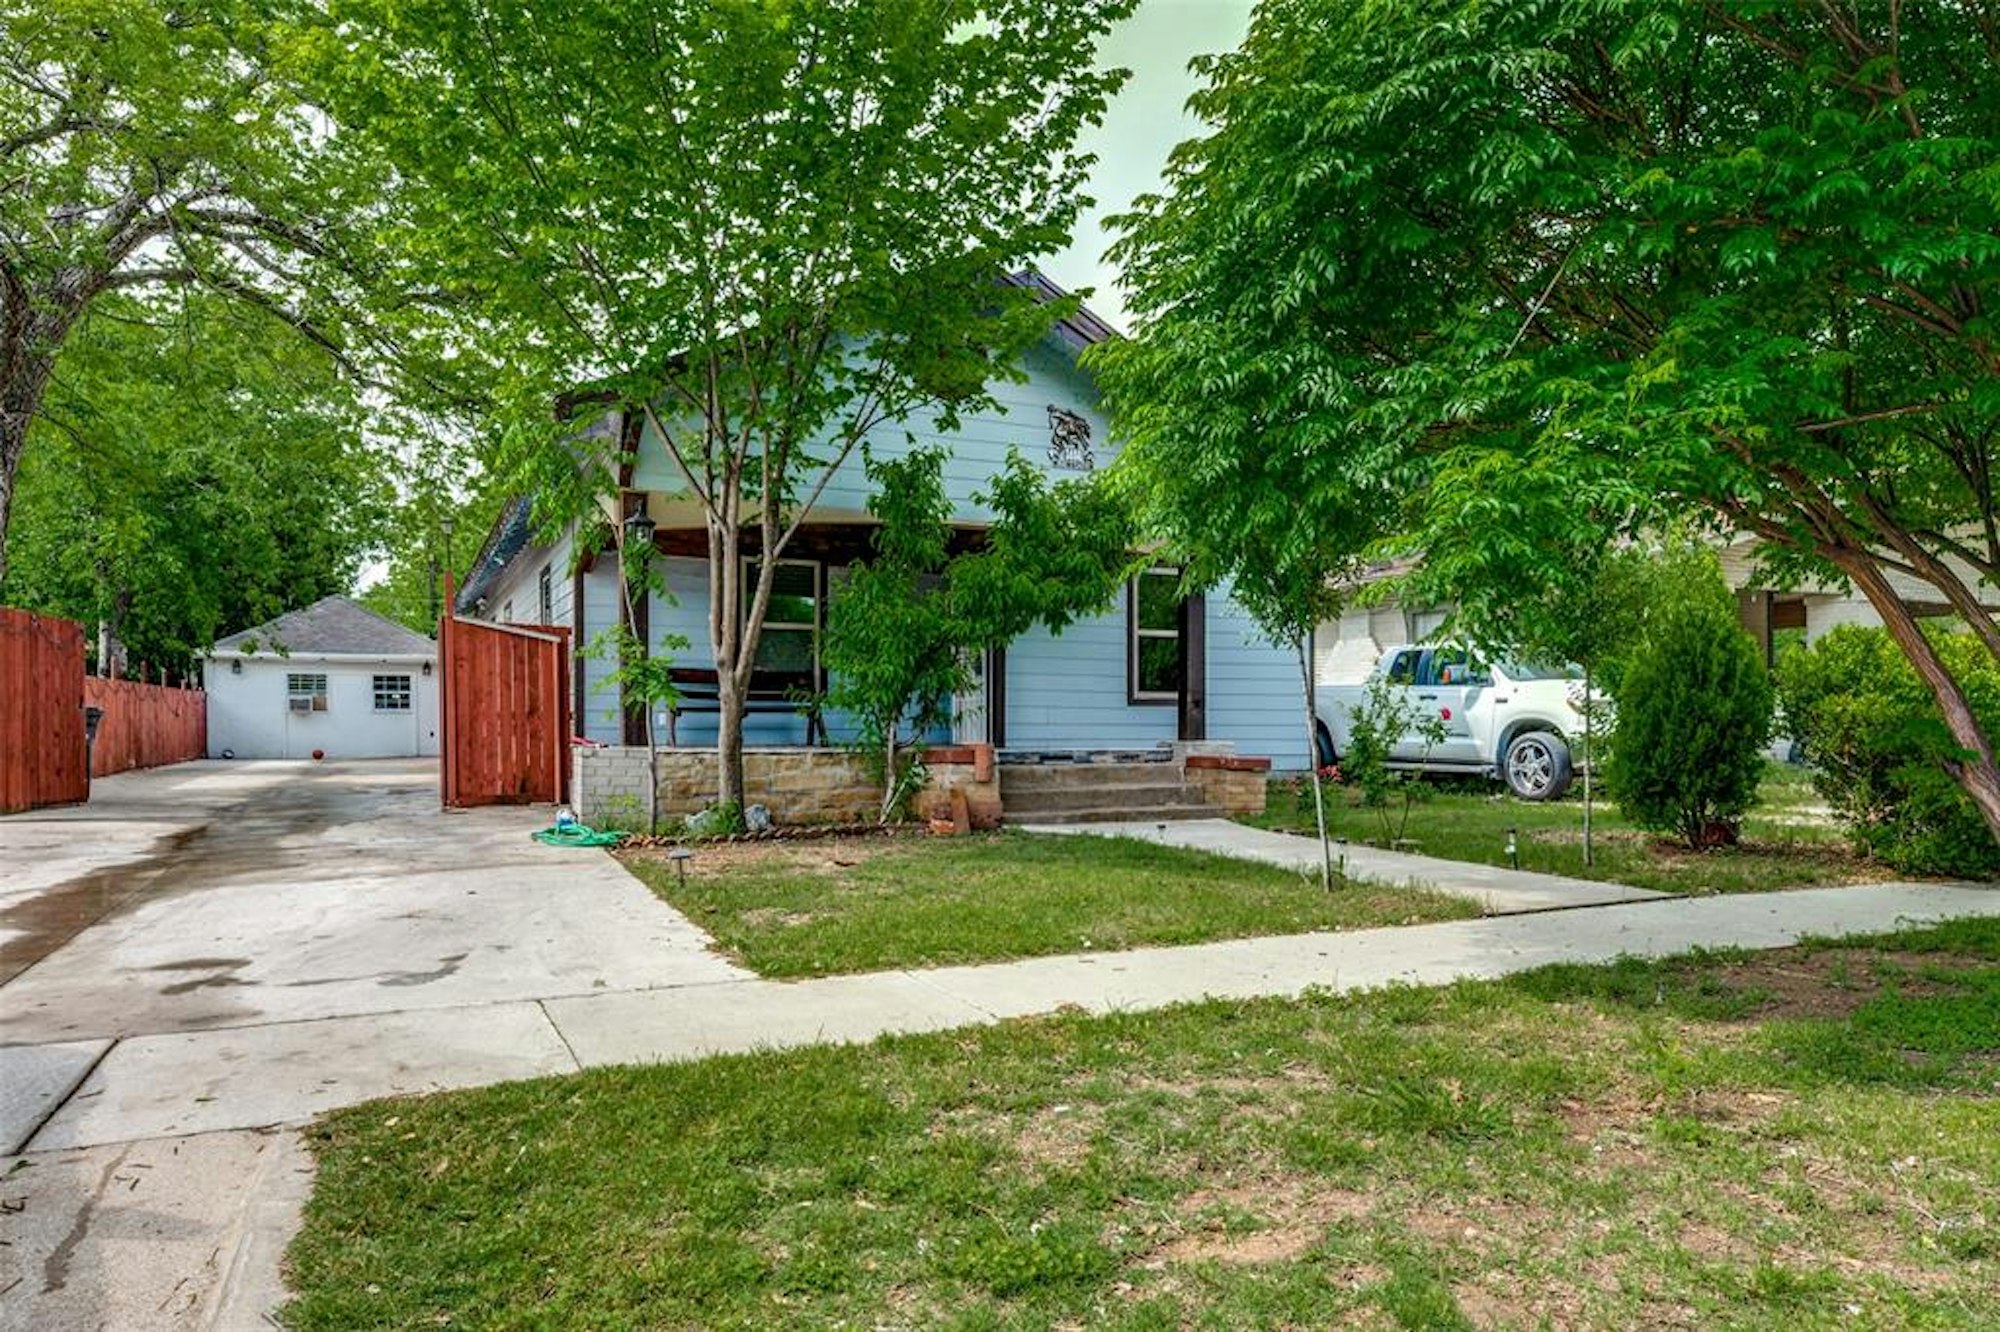 Photo 1 of 25 - 3404 Avenue G, Fort Worth, TX 76105